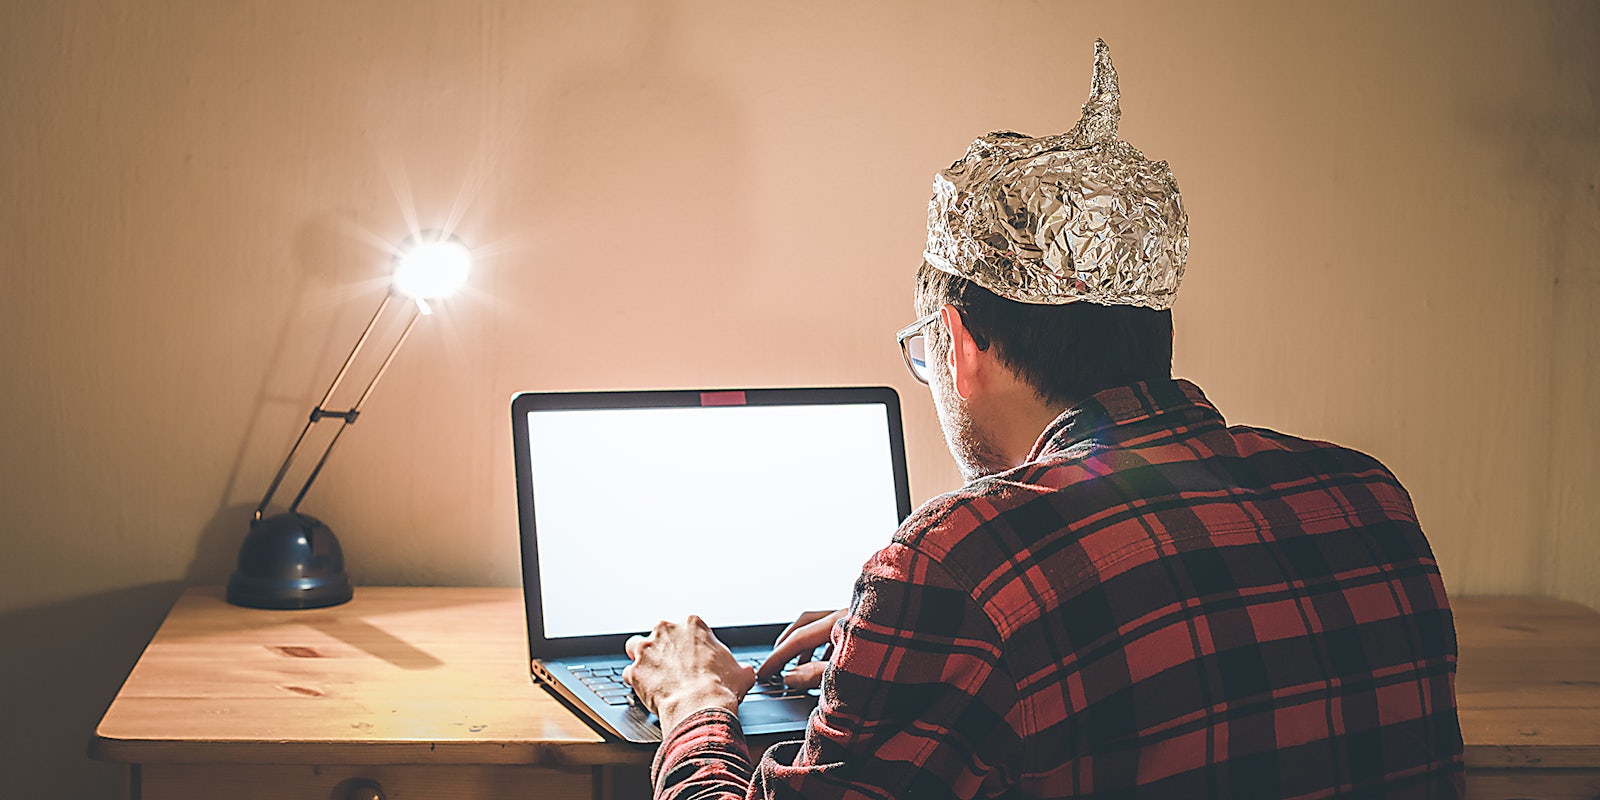 A man in an aluminum hat on a computer.